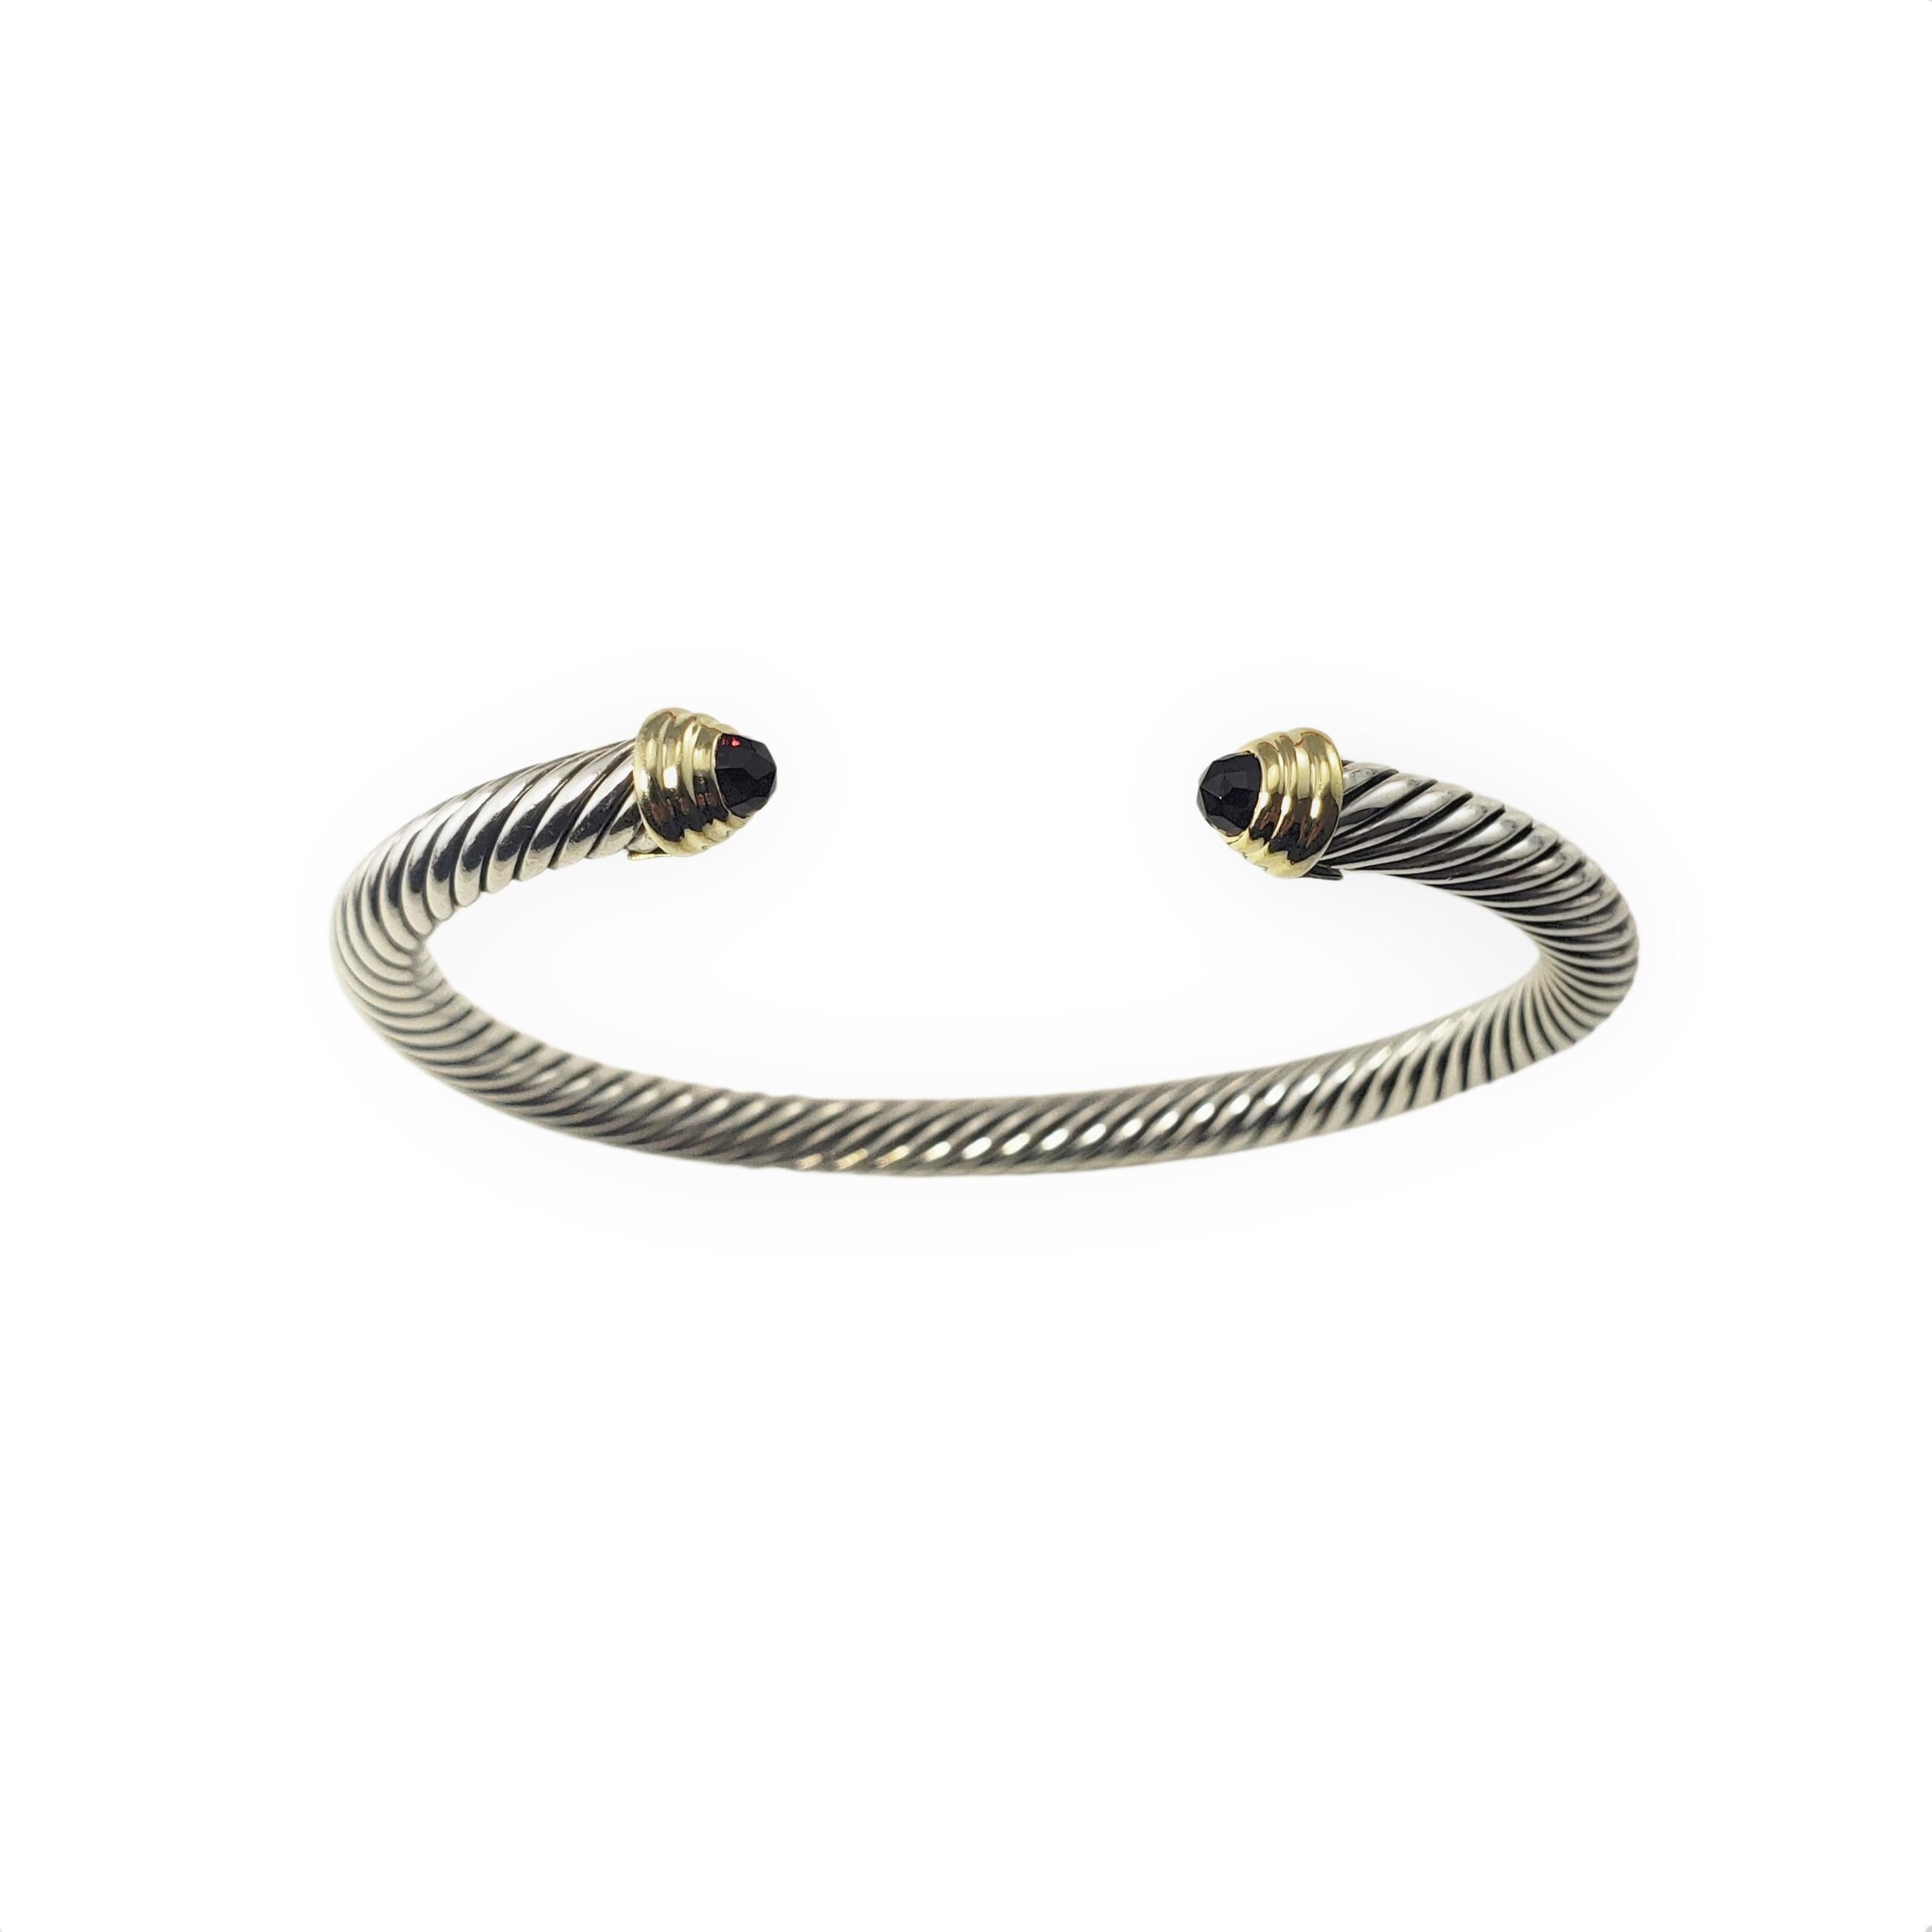 David Yurman Sterling Silver and 14 Karat Yellow Gold Garnet Cuff Bracelet-

This lovely cable bracelet by David Yurman is accented with two faceted garnets (3 mm) set in beautifully detailed sterling silver and 14K yellow gold.  Width:  5